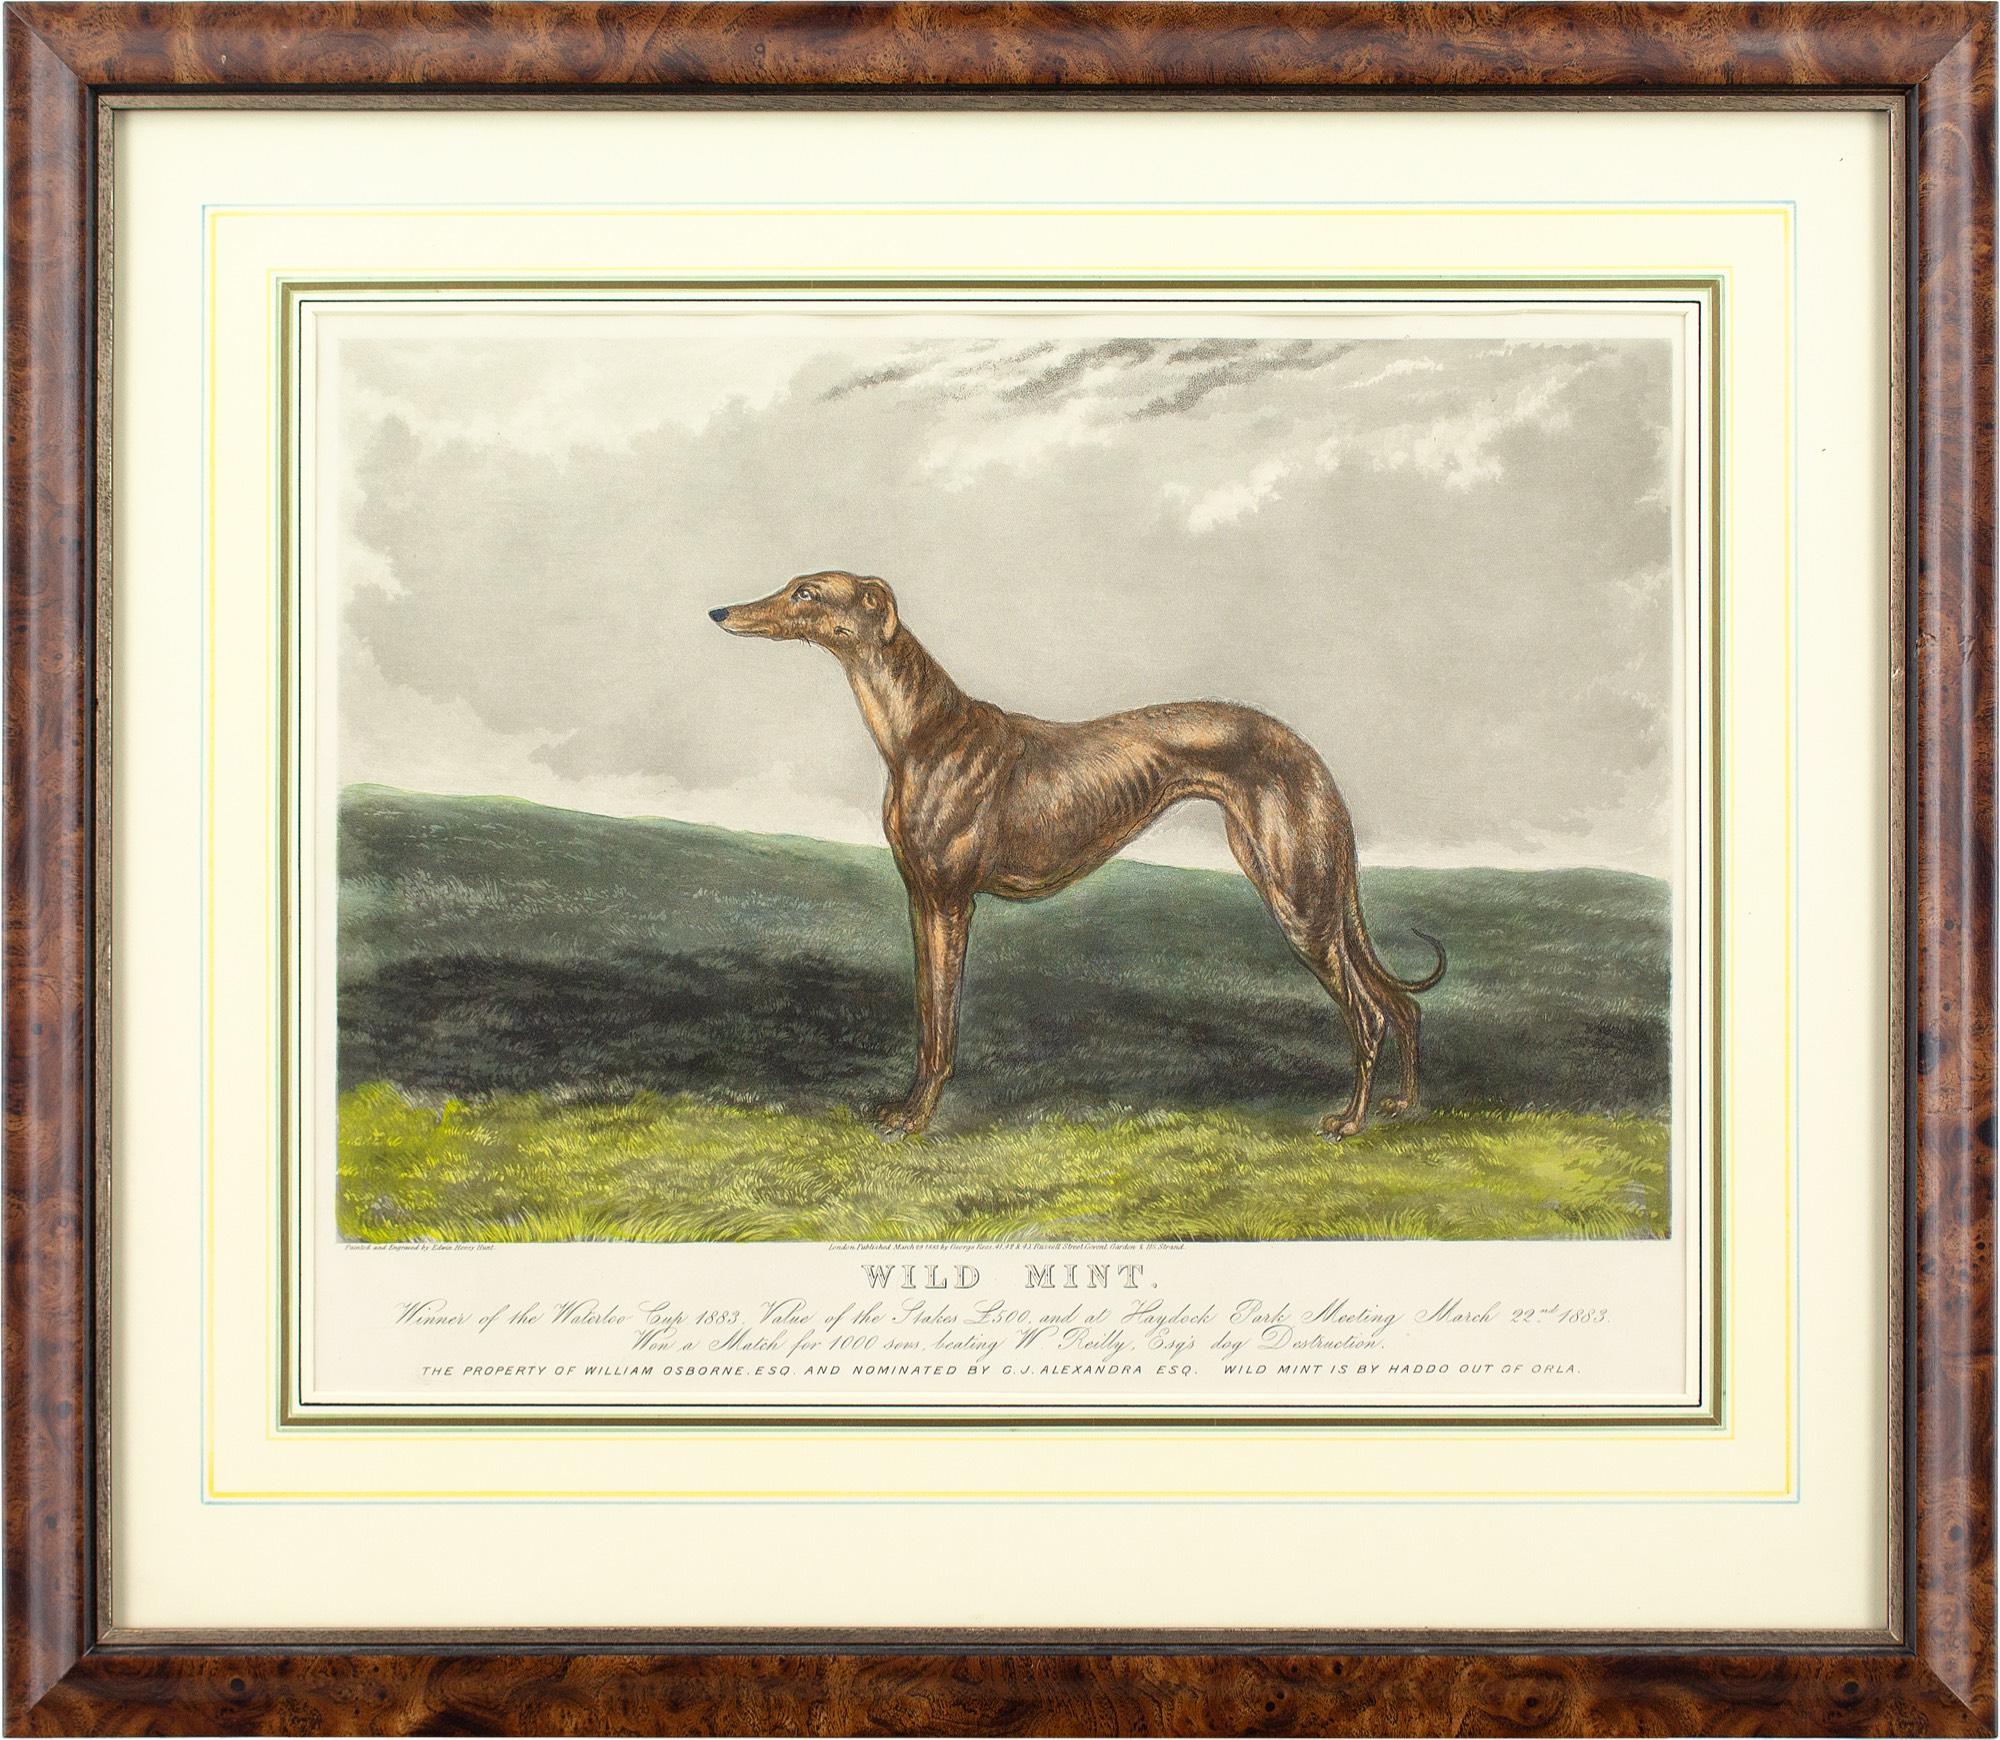 This late 19th-century hand-coloured engraving by British artist Edwin Henry Hunt (1840-1925) depicts the racing greyhound Wild Mint.

Victorians relished the exhilaration of greyhound racing and flocked to numerous events. Notable winners were